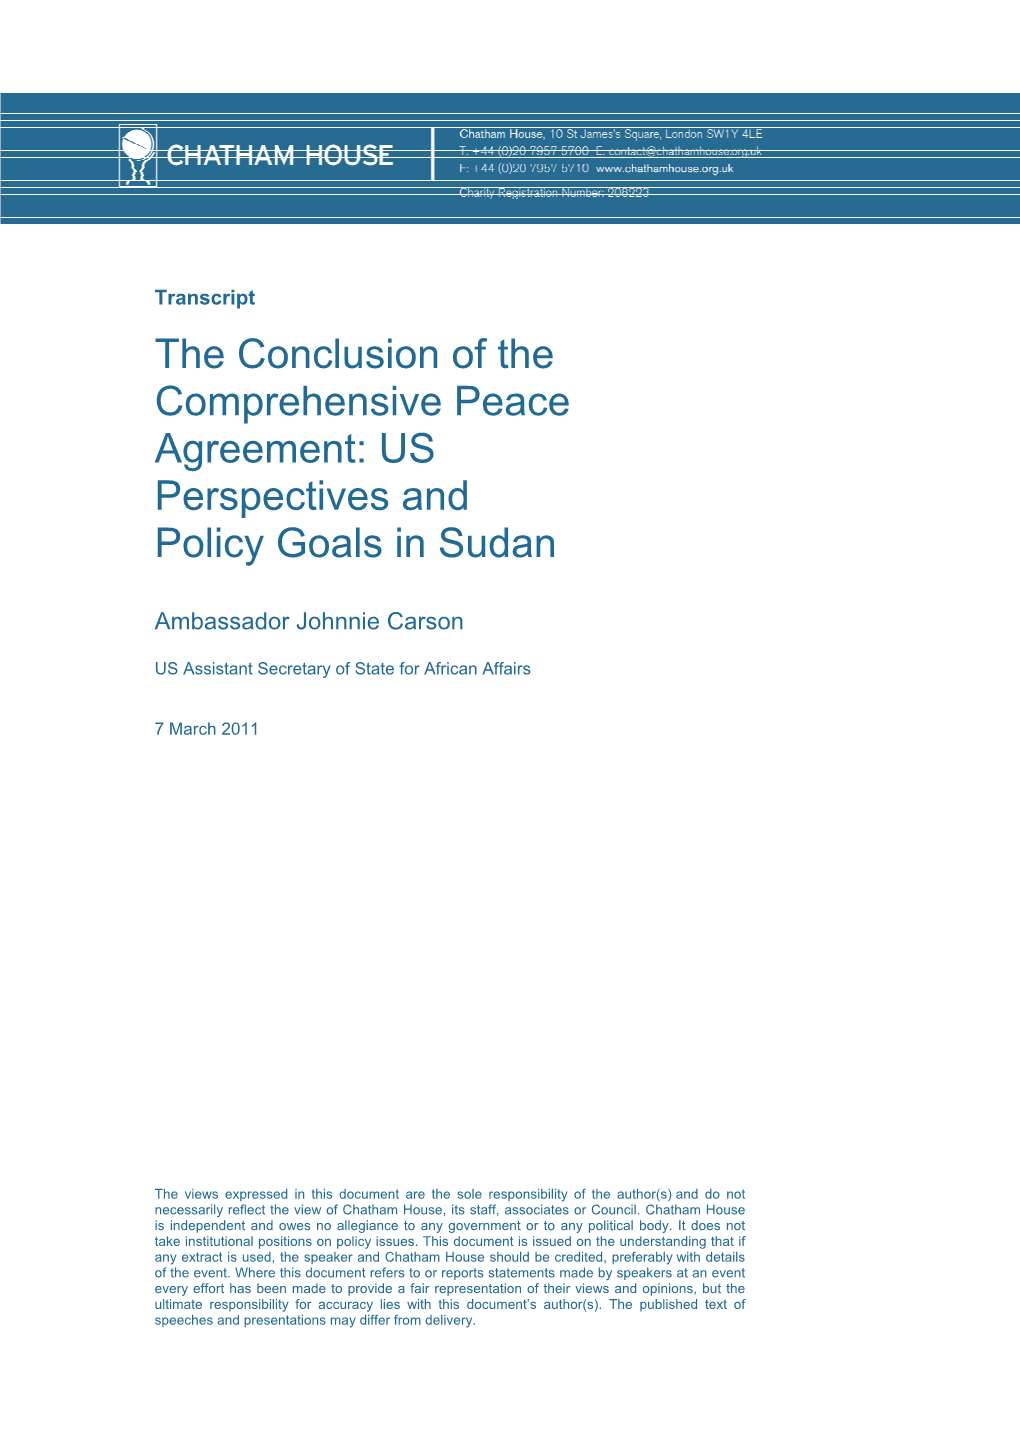 US Perspectives and Policy Goals in Sudan